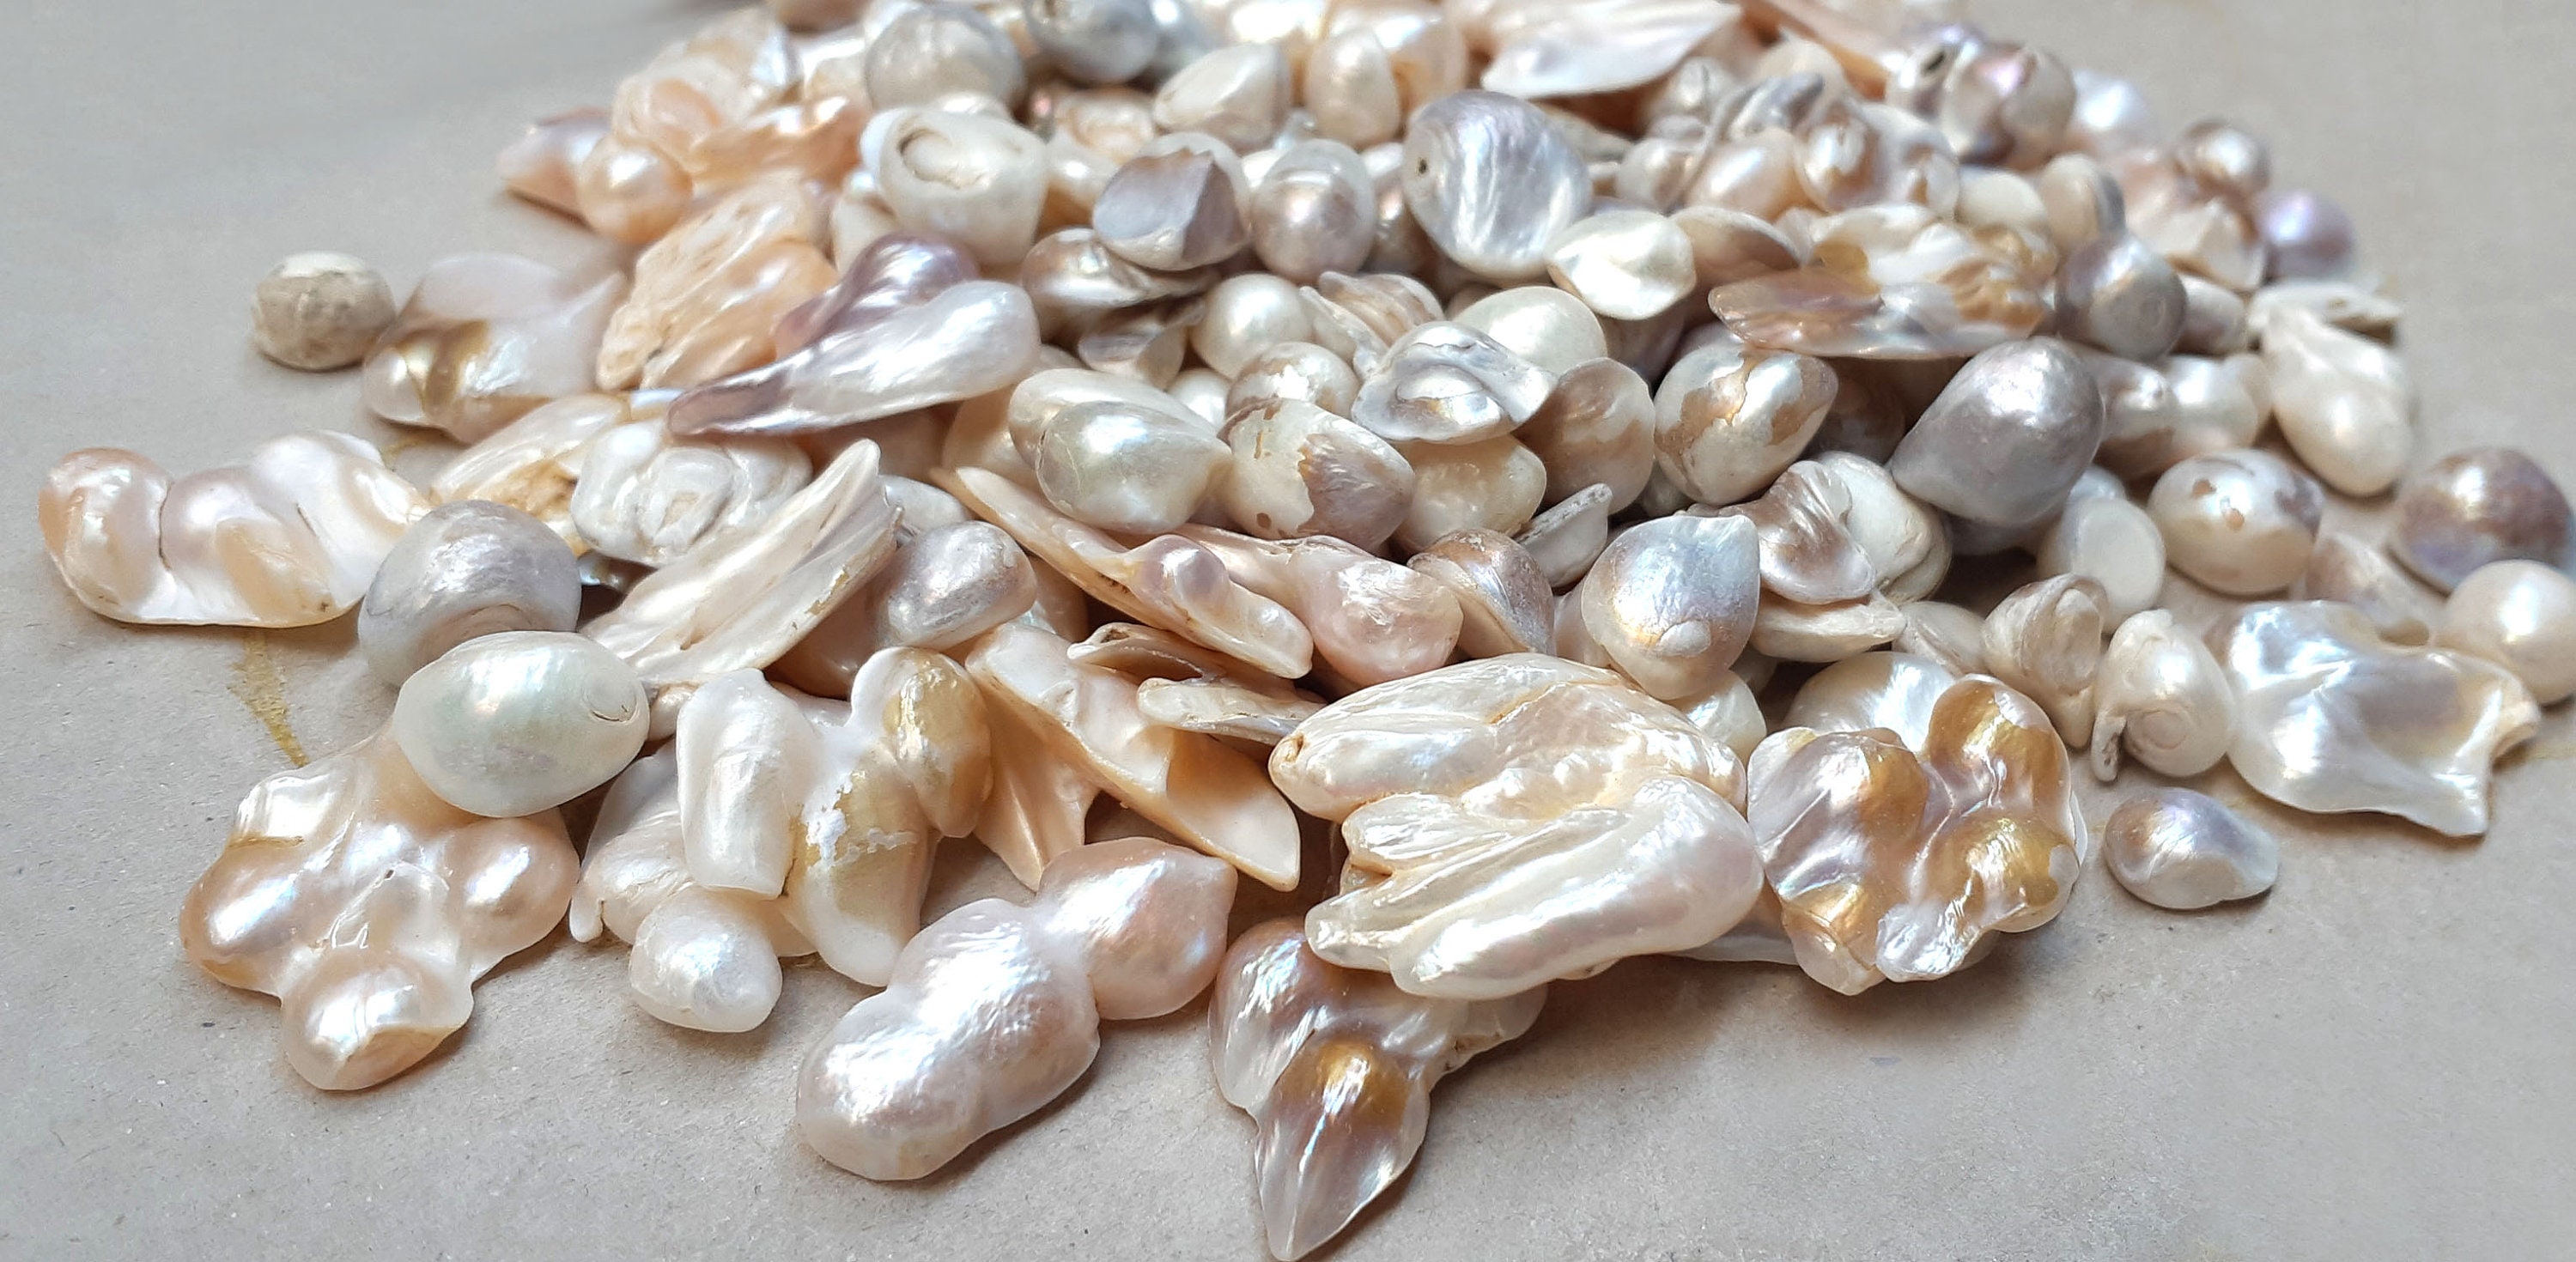 10-40mm Large Keshi Pearl,loose Cultured Pearls, Undrilled, Super Large  Pearl Beads, Irregular Pearl Mixed, Nugget Pearl, Rough Pearl PB029 